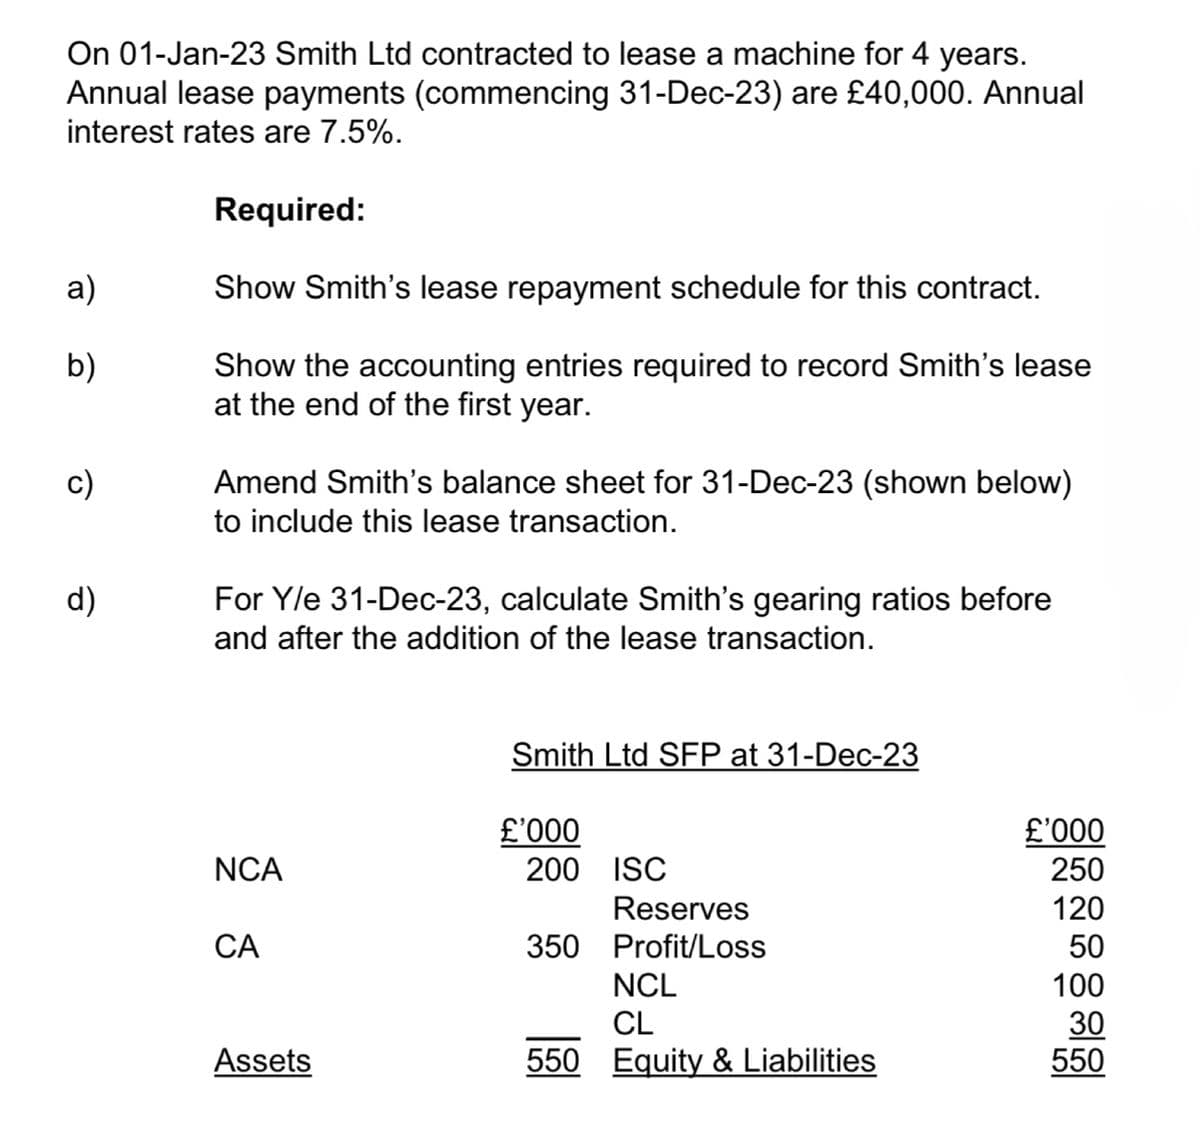 On 01-Jan-23 Smith Ltd contracted to lease a machine for 4 years.
Annual lease payments (commencing 31-Dec-23) are £40,000. Annual
interest rates are 7.5%.
a)
b)
c)
d)
Required:
Show Smith's lease repayment schedule for this contract.
Show the accounting entries required to record Smith's lease
at the end of the first year.
Amend Smith's balance sheet for 31-Dec-23 (shown below)
to include this lease transaction.
For Y/e 31-Dec-23, calculate Smith's gearing ratios before
and after the addition of the lease transaction.
Smith Ltd SFP at 31-Dec-23
£'000
£'000
NCA
200
ISC
250
Reserves
120
CA
350 Profit/Loss
50
NCL
CL
100
30
Assets
550 Equity & Liabilities
550